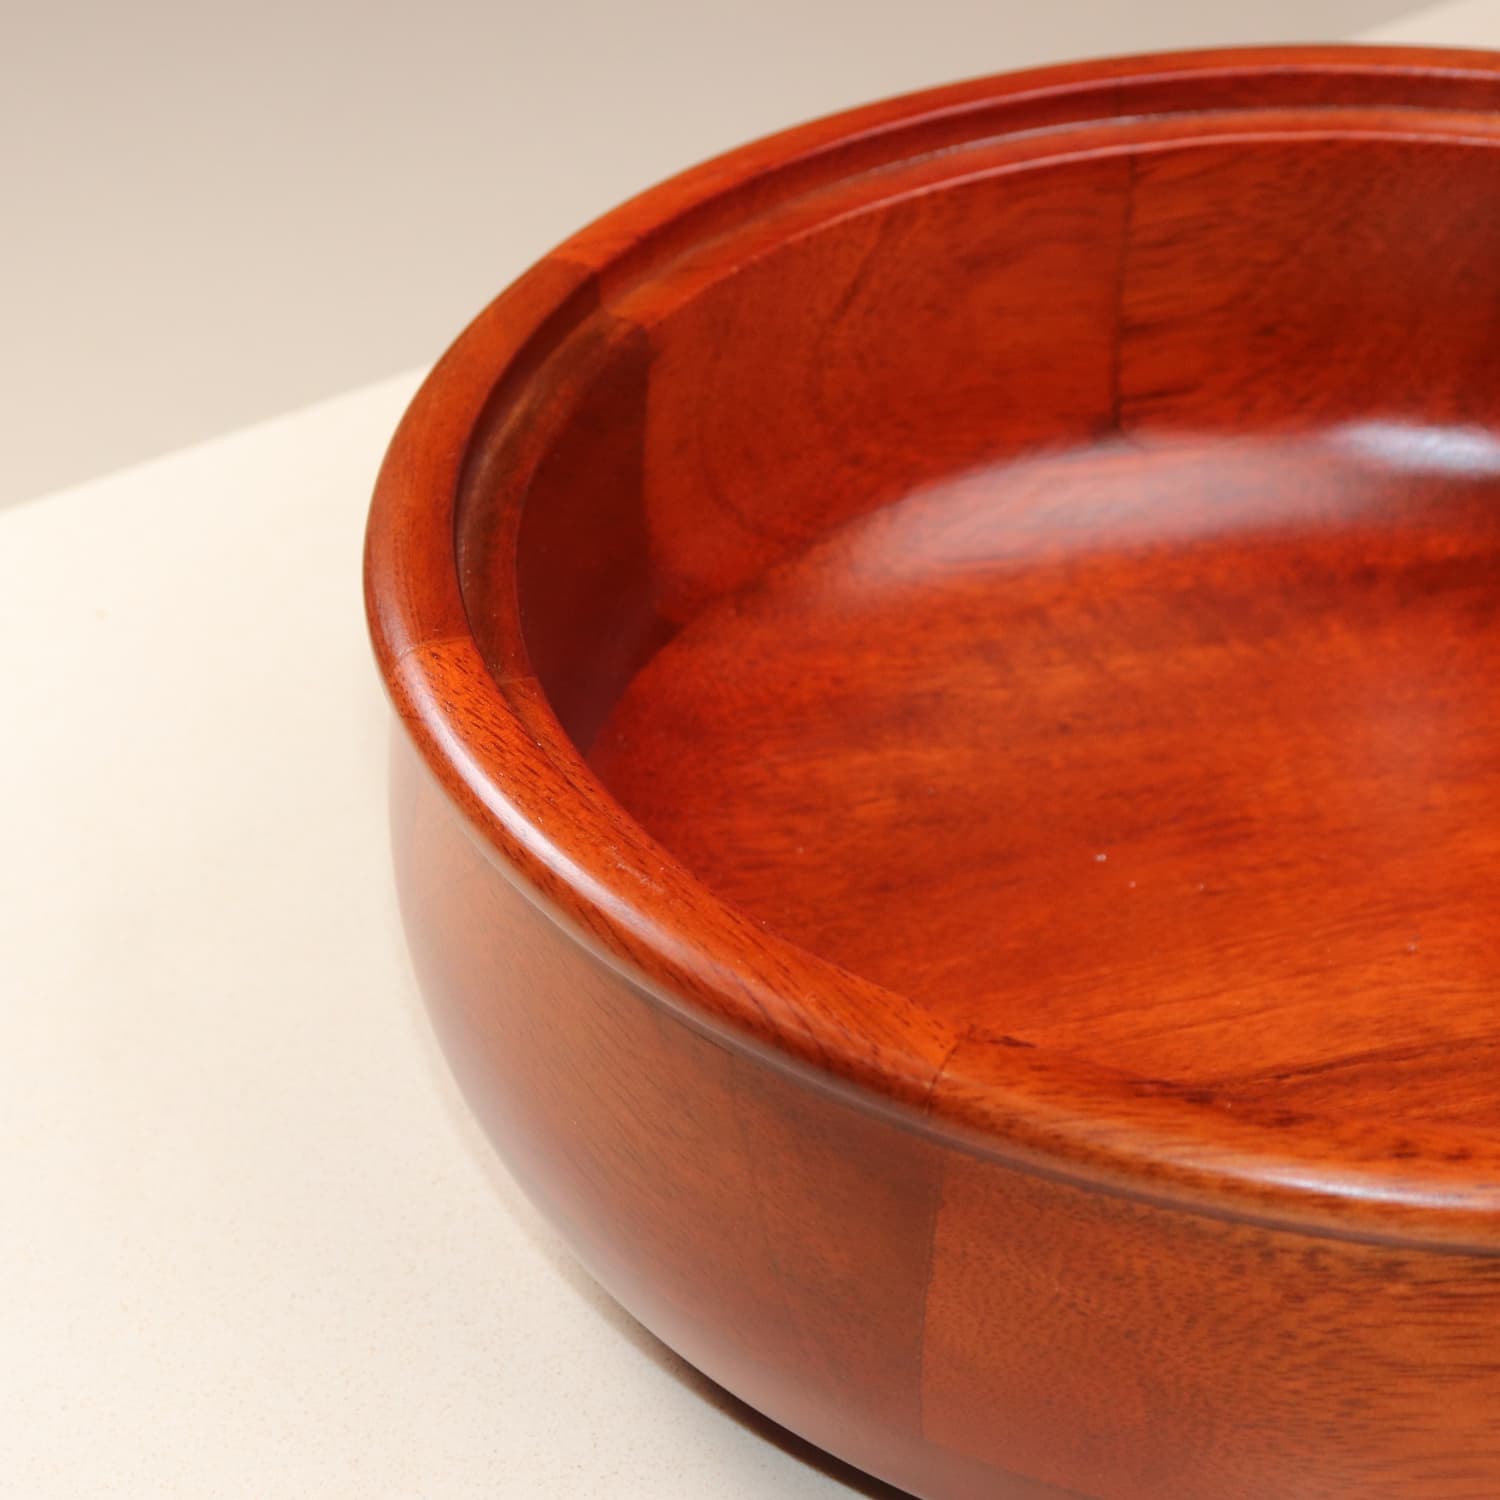 A close-up of a large, round, wooden bowl with a rich, polished finish. The bowl is empty and placed on a light-colored surface, showcasing its smooth texture and warm mahogany color. This could complement your kitchen as perfectly as The Woody Casserole Chapati box by LOOSEBUCKET online in India.